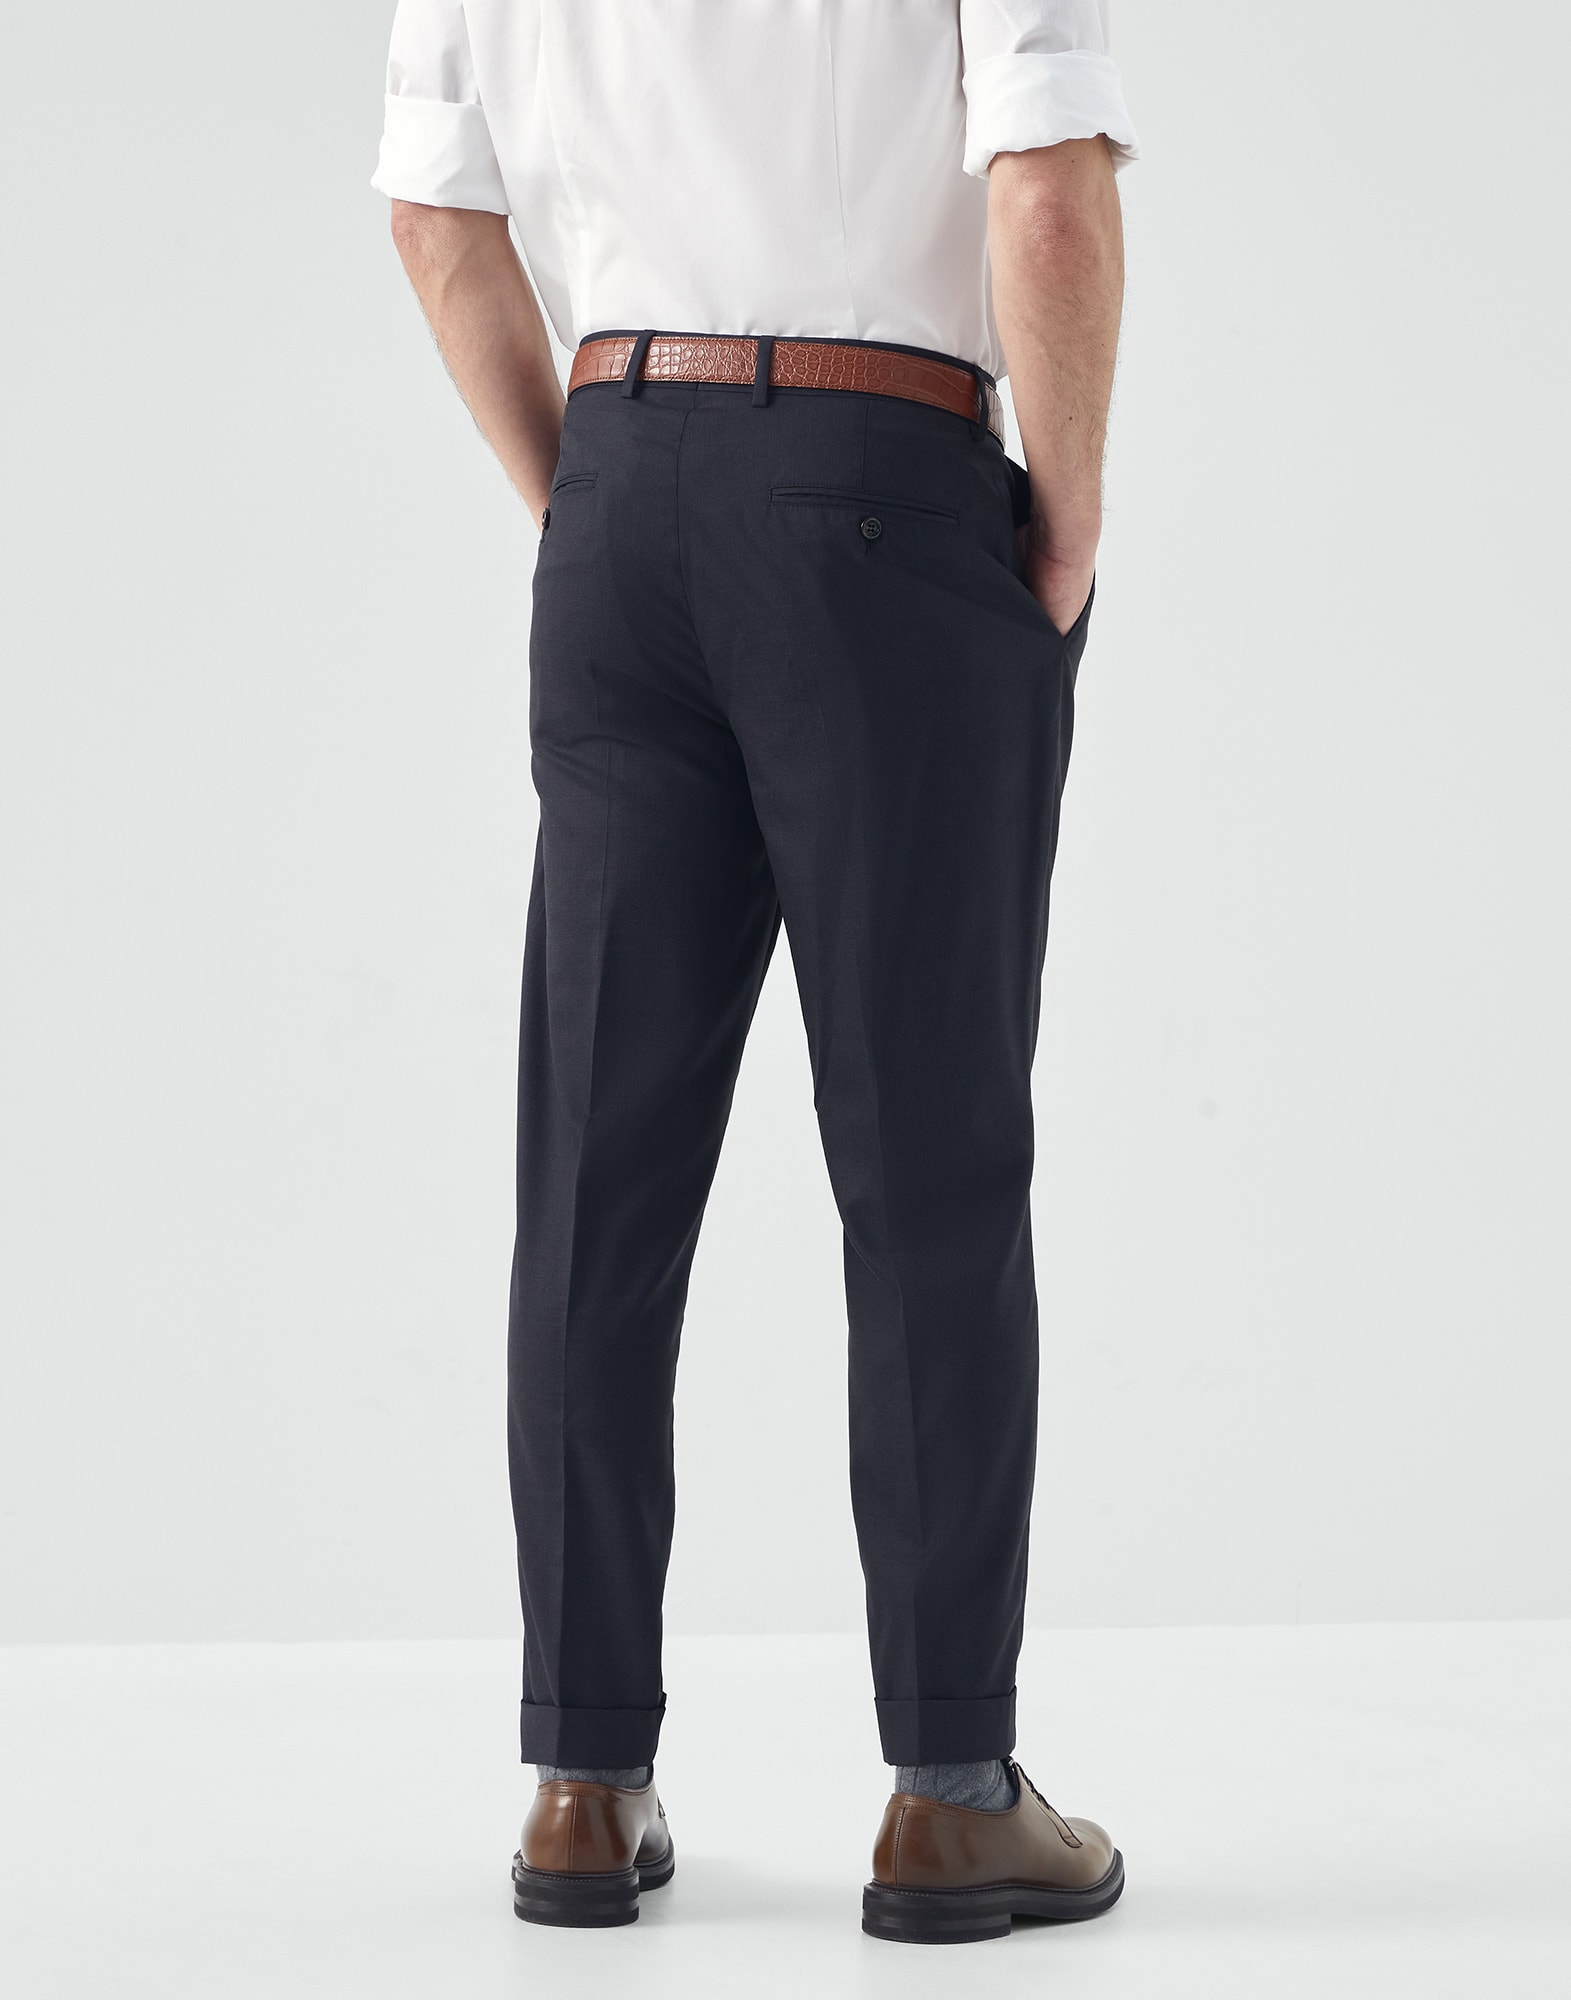 Formal fit trousers (232MH426PA0Z) for Man | Brunello Cucinelli